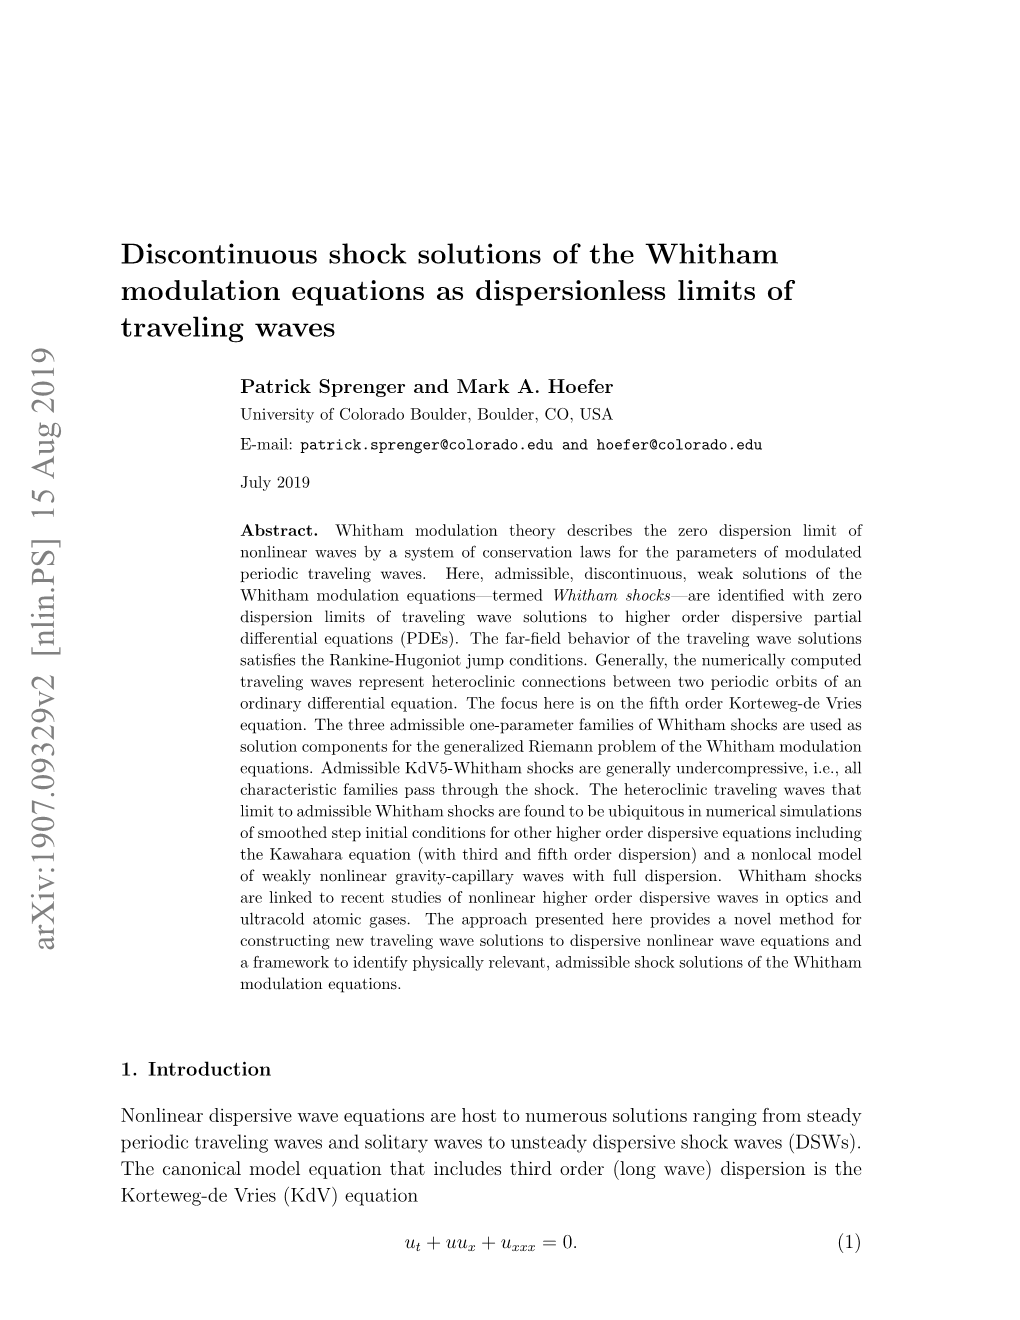 Discontinuous Shock Solutions of the Whitham Modulation Equations As Dispersionless Limits of Traveling Waves